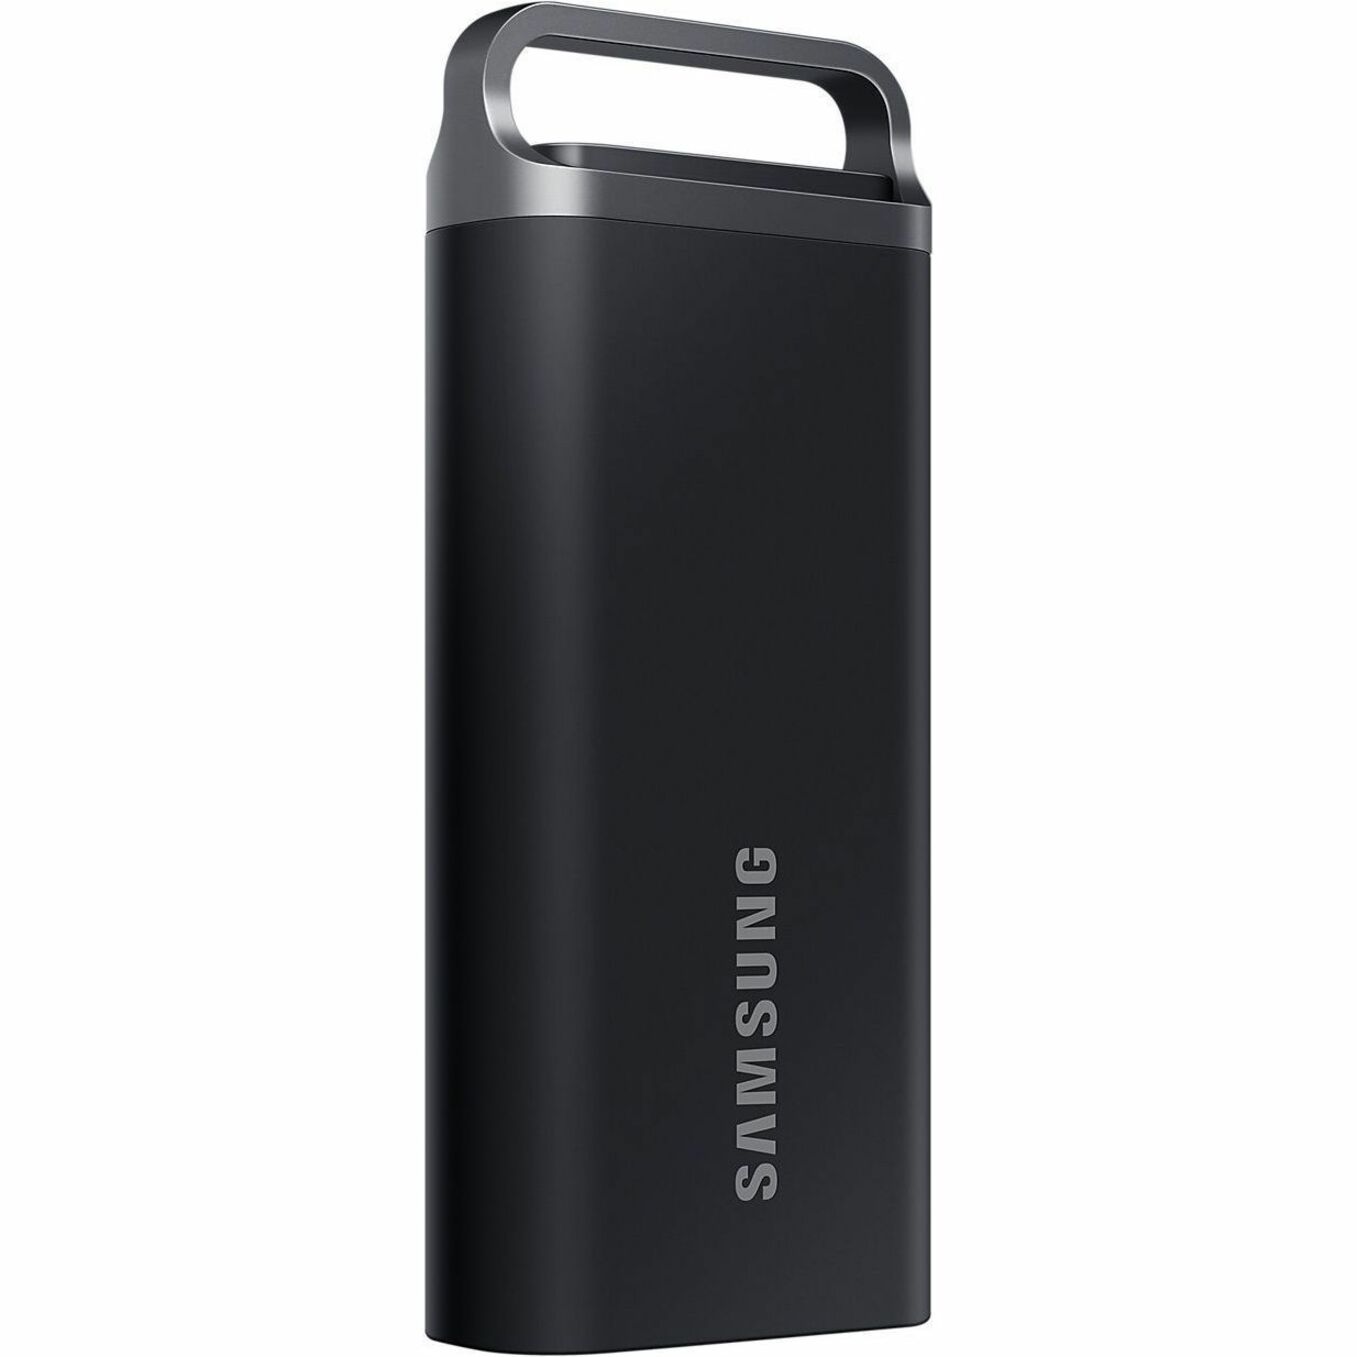  SAMSUNG T5 EVO Portable SSD 4TB, USB 3.2 Gen 1 External Solid  State Drive, Seq. Read Speeds Up to 460MB/s for Gaming and Content  Creation, MU-PH4T0S/AM, Black : Electronics